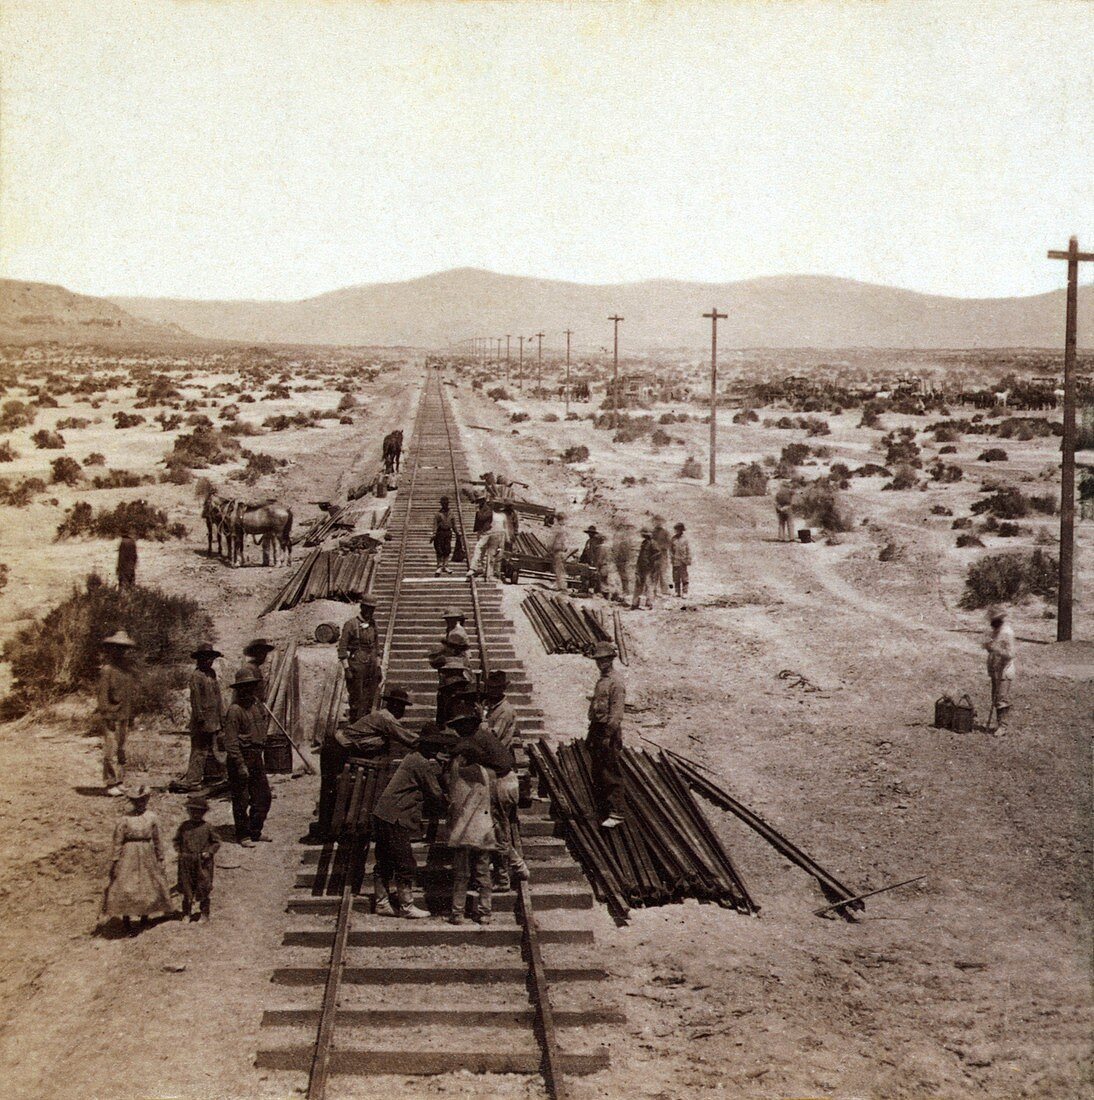 Laying Transcontinental Railroad,1860s